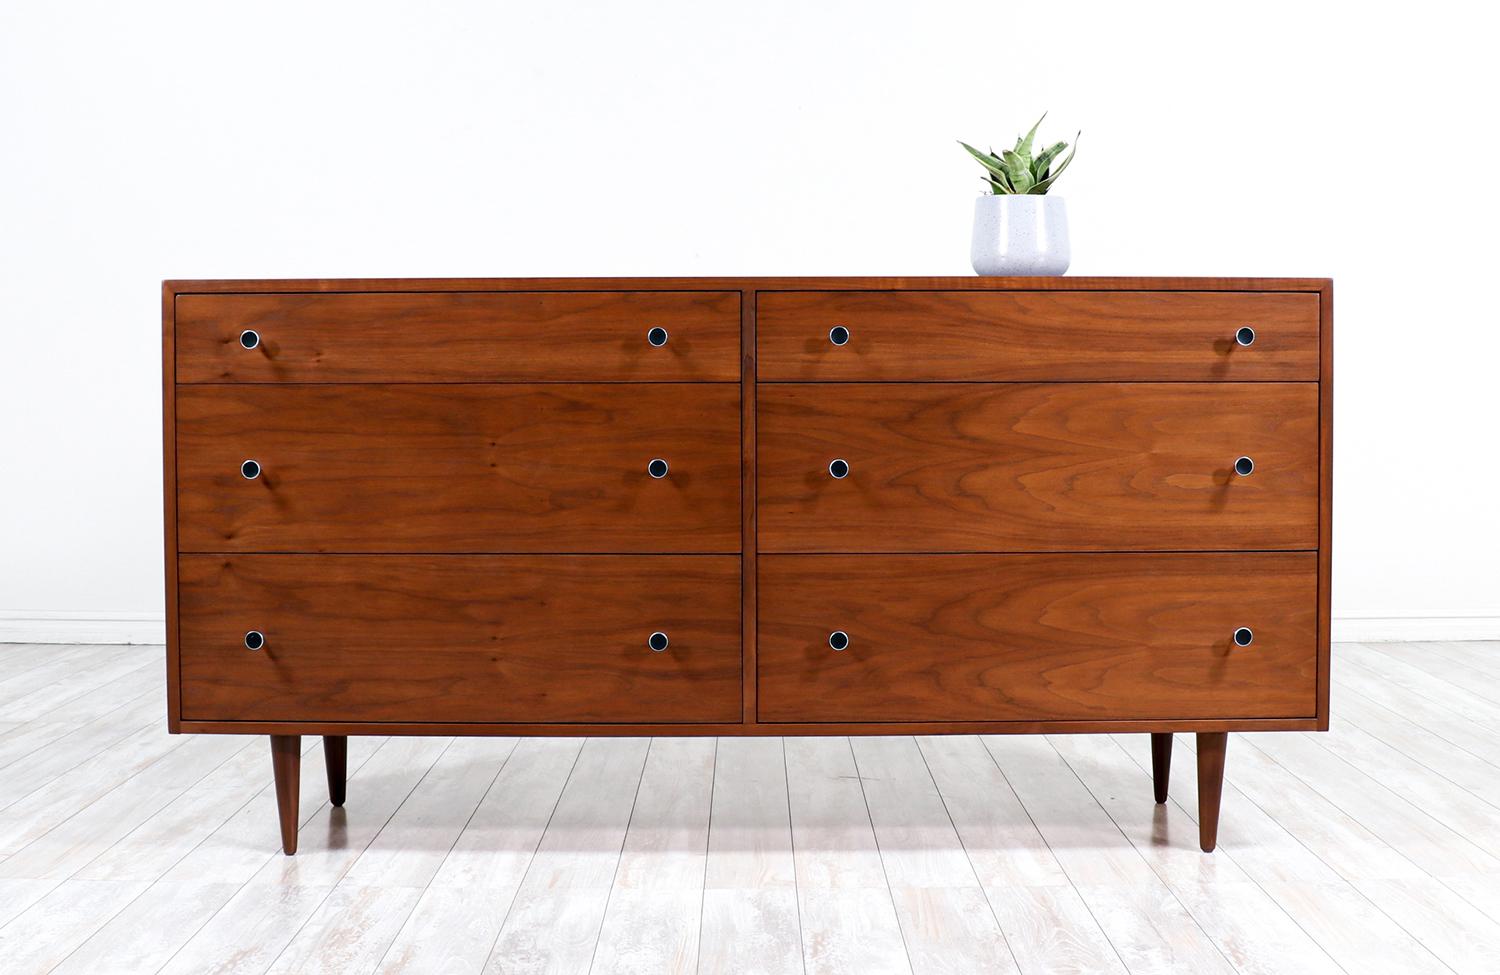 Mid-century modern dresser designed by Kipp Stewart and Stewart MacDougall for Glenn of California in the United States circa 1950s. Newly refinished by our expert craftsmen, this spectacular six-drawer dresser features dovetailed construction and a